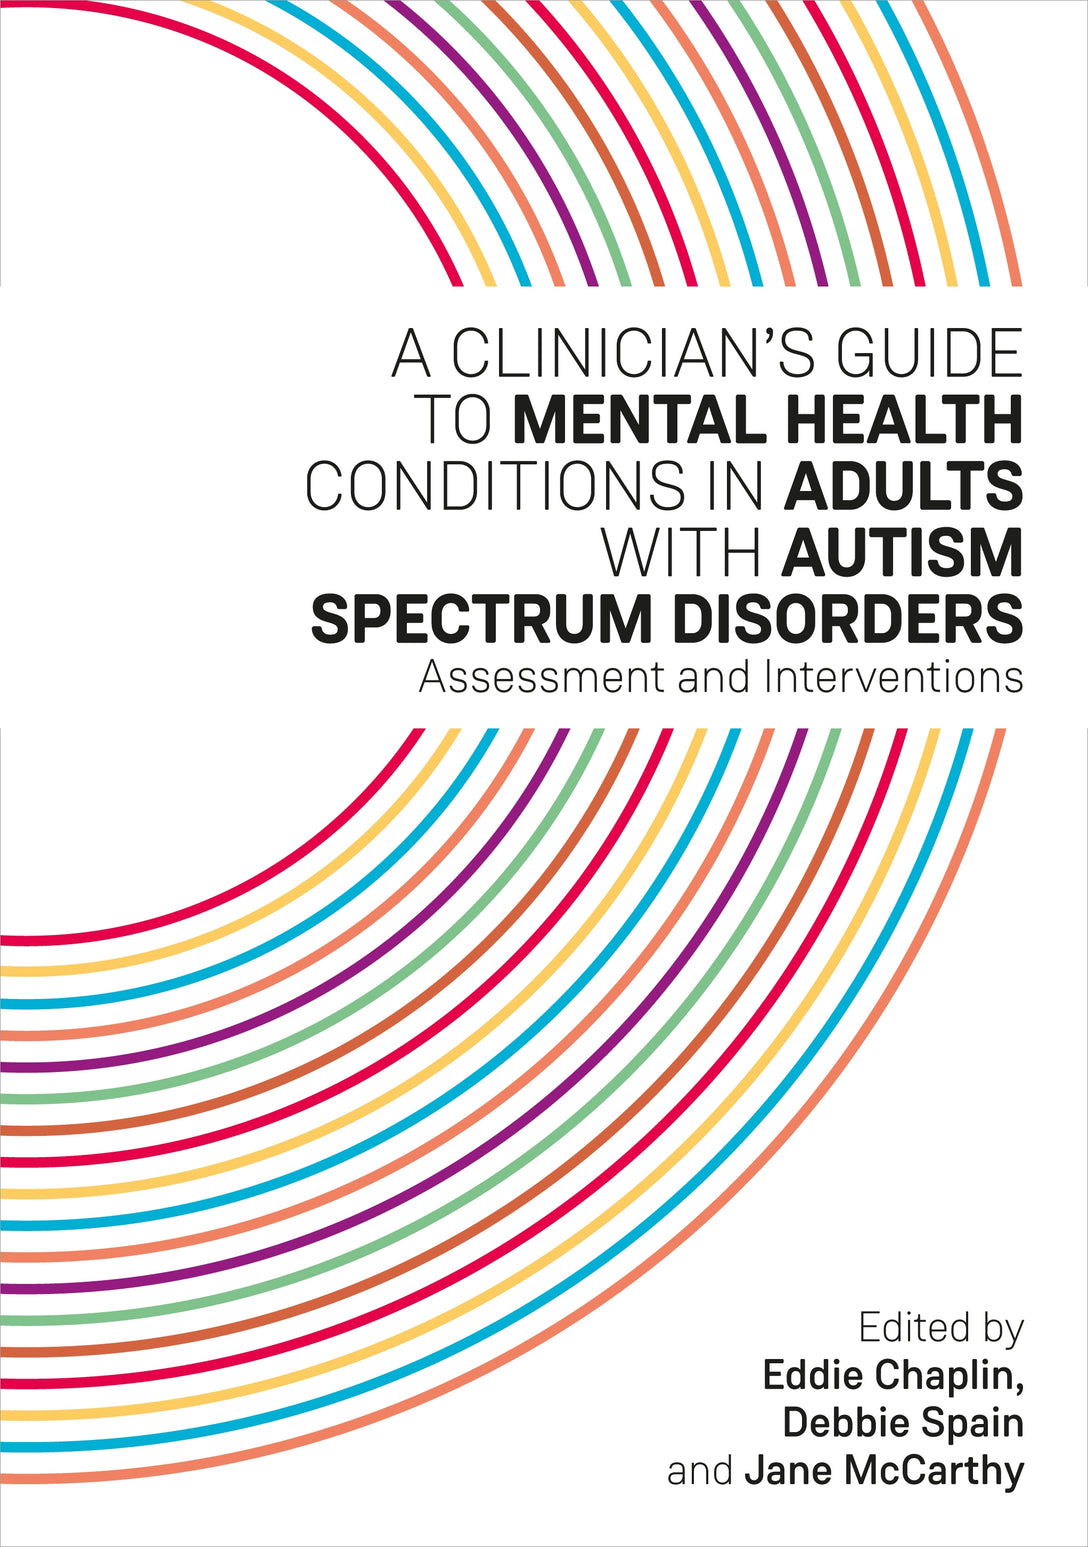 A Clinician's Guide to Mental Health Conditions in Adults with Autism Spectrum Disorders by Eddie Chaplin, Jane McCarthy, Debbie Spain, No Author Listed